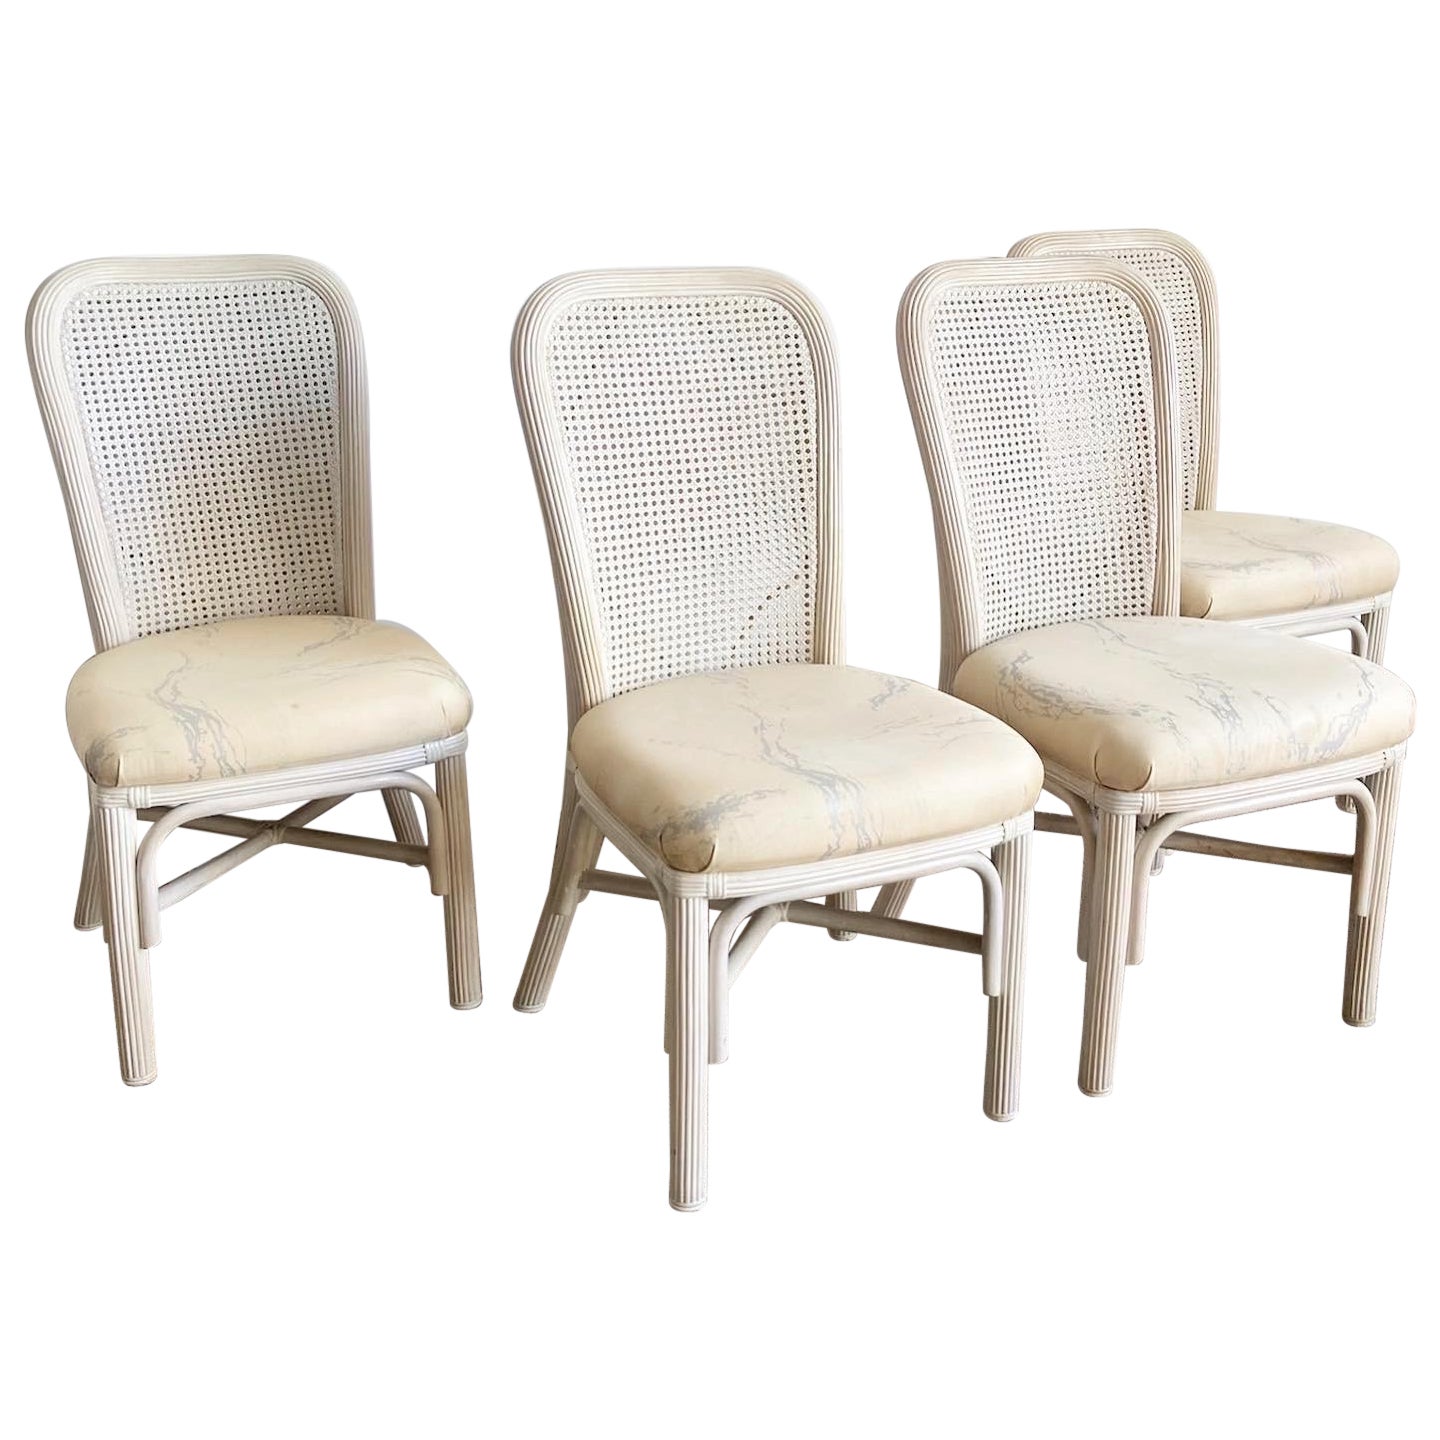 Boho Chic Pencil Reed Cane Back Dining Chairs - Set of 4 For Sale